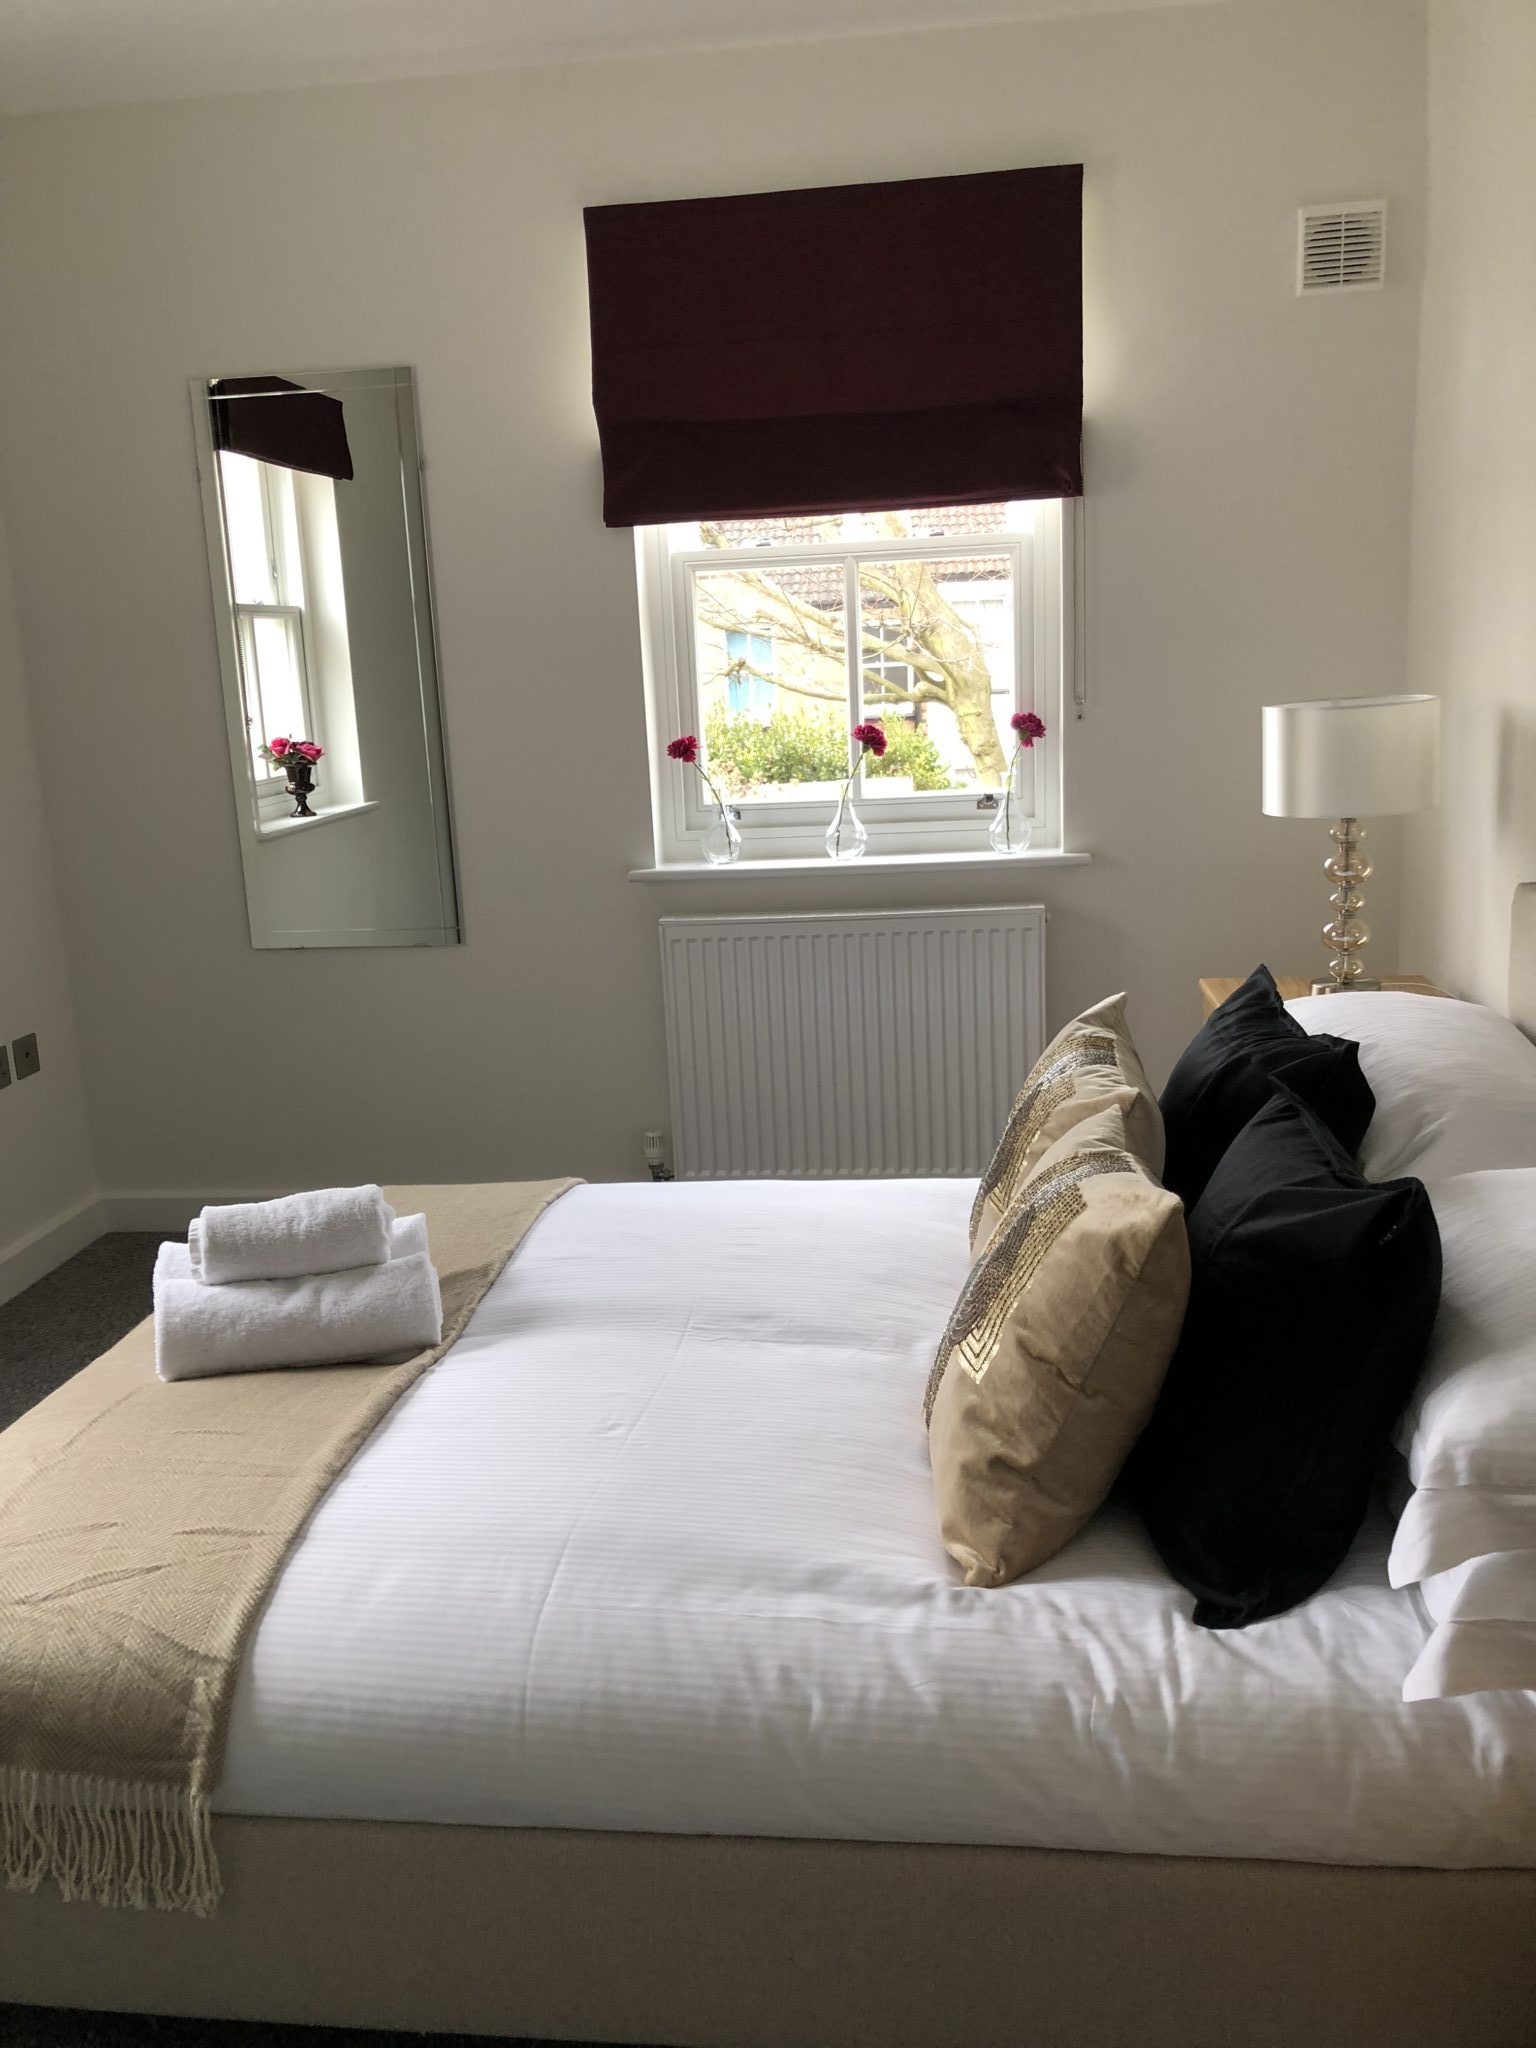 Derbyshire-House-Serviced-Apartments-St-Albans-Self-Catering-Accommodation-Hertfordshire-Uk-Urban-Stay-2